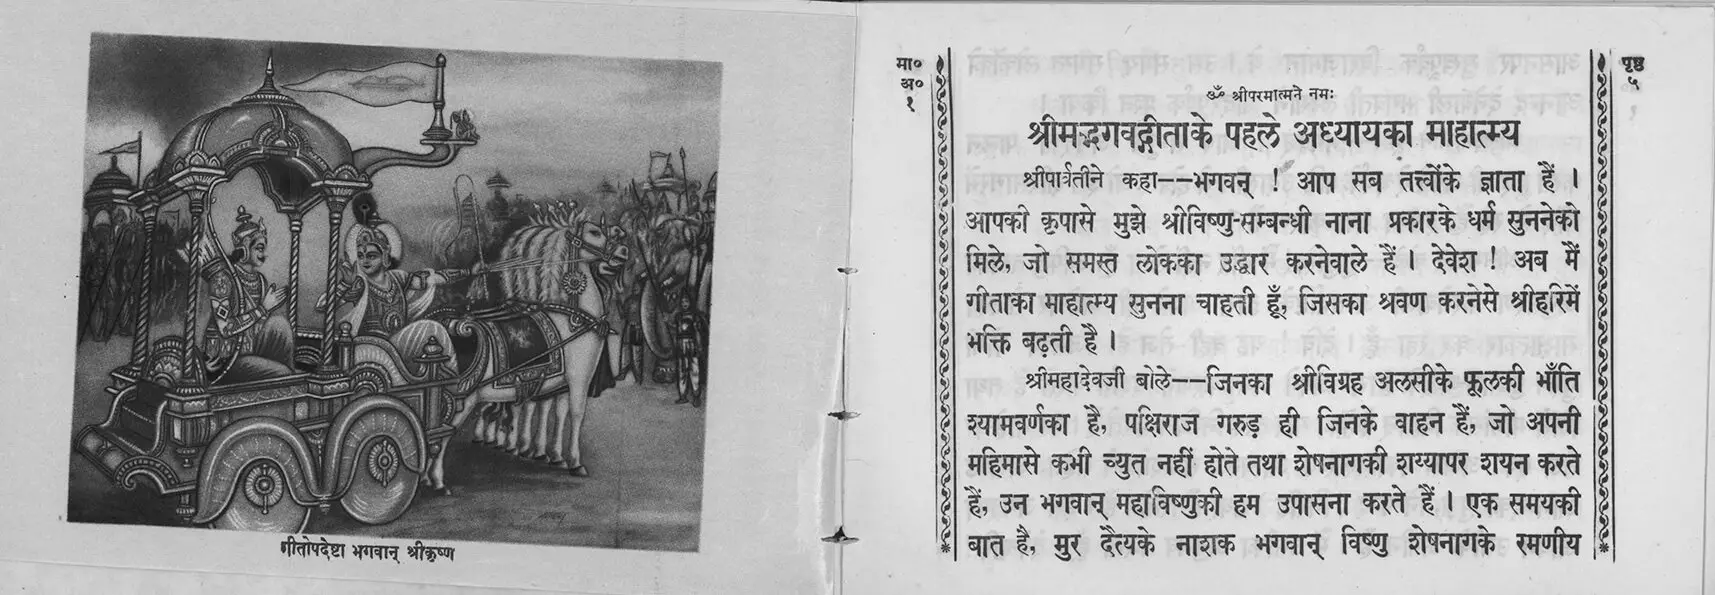 Writing in Hindi is shown next to an image depicting a man in an intricate, horse-drawn carriage, speaking to the driver amidst flags and an army in front of him.